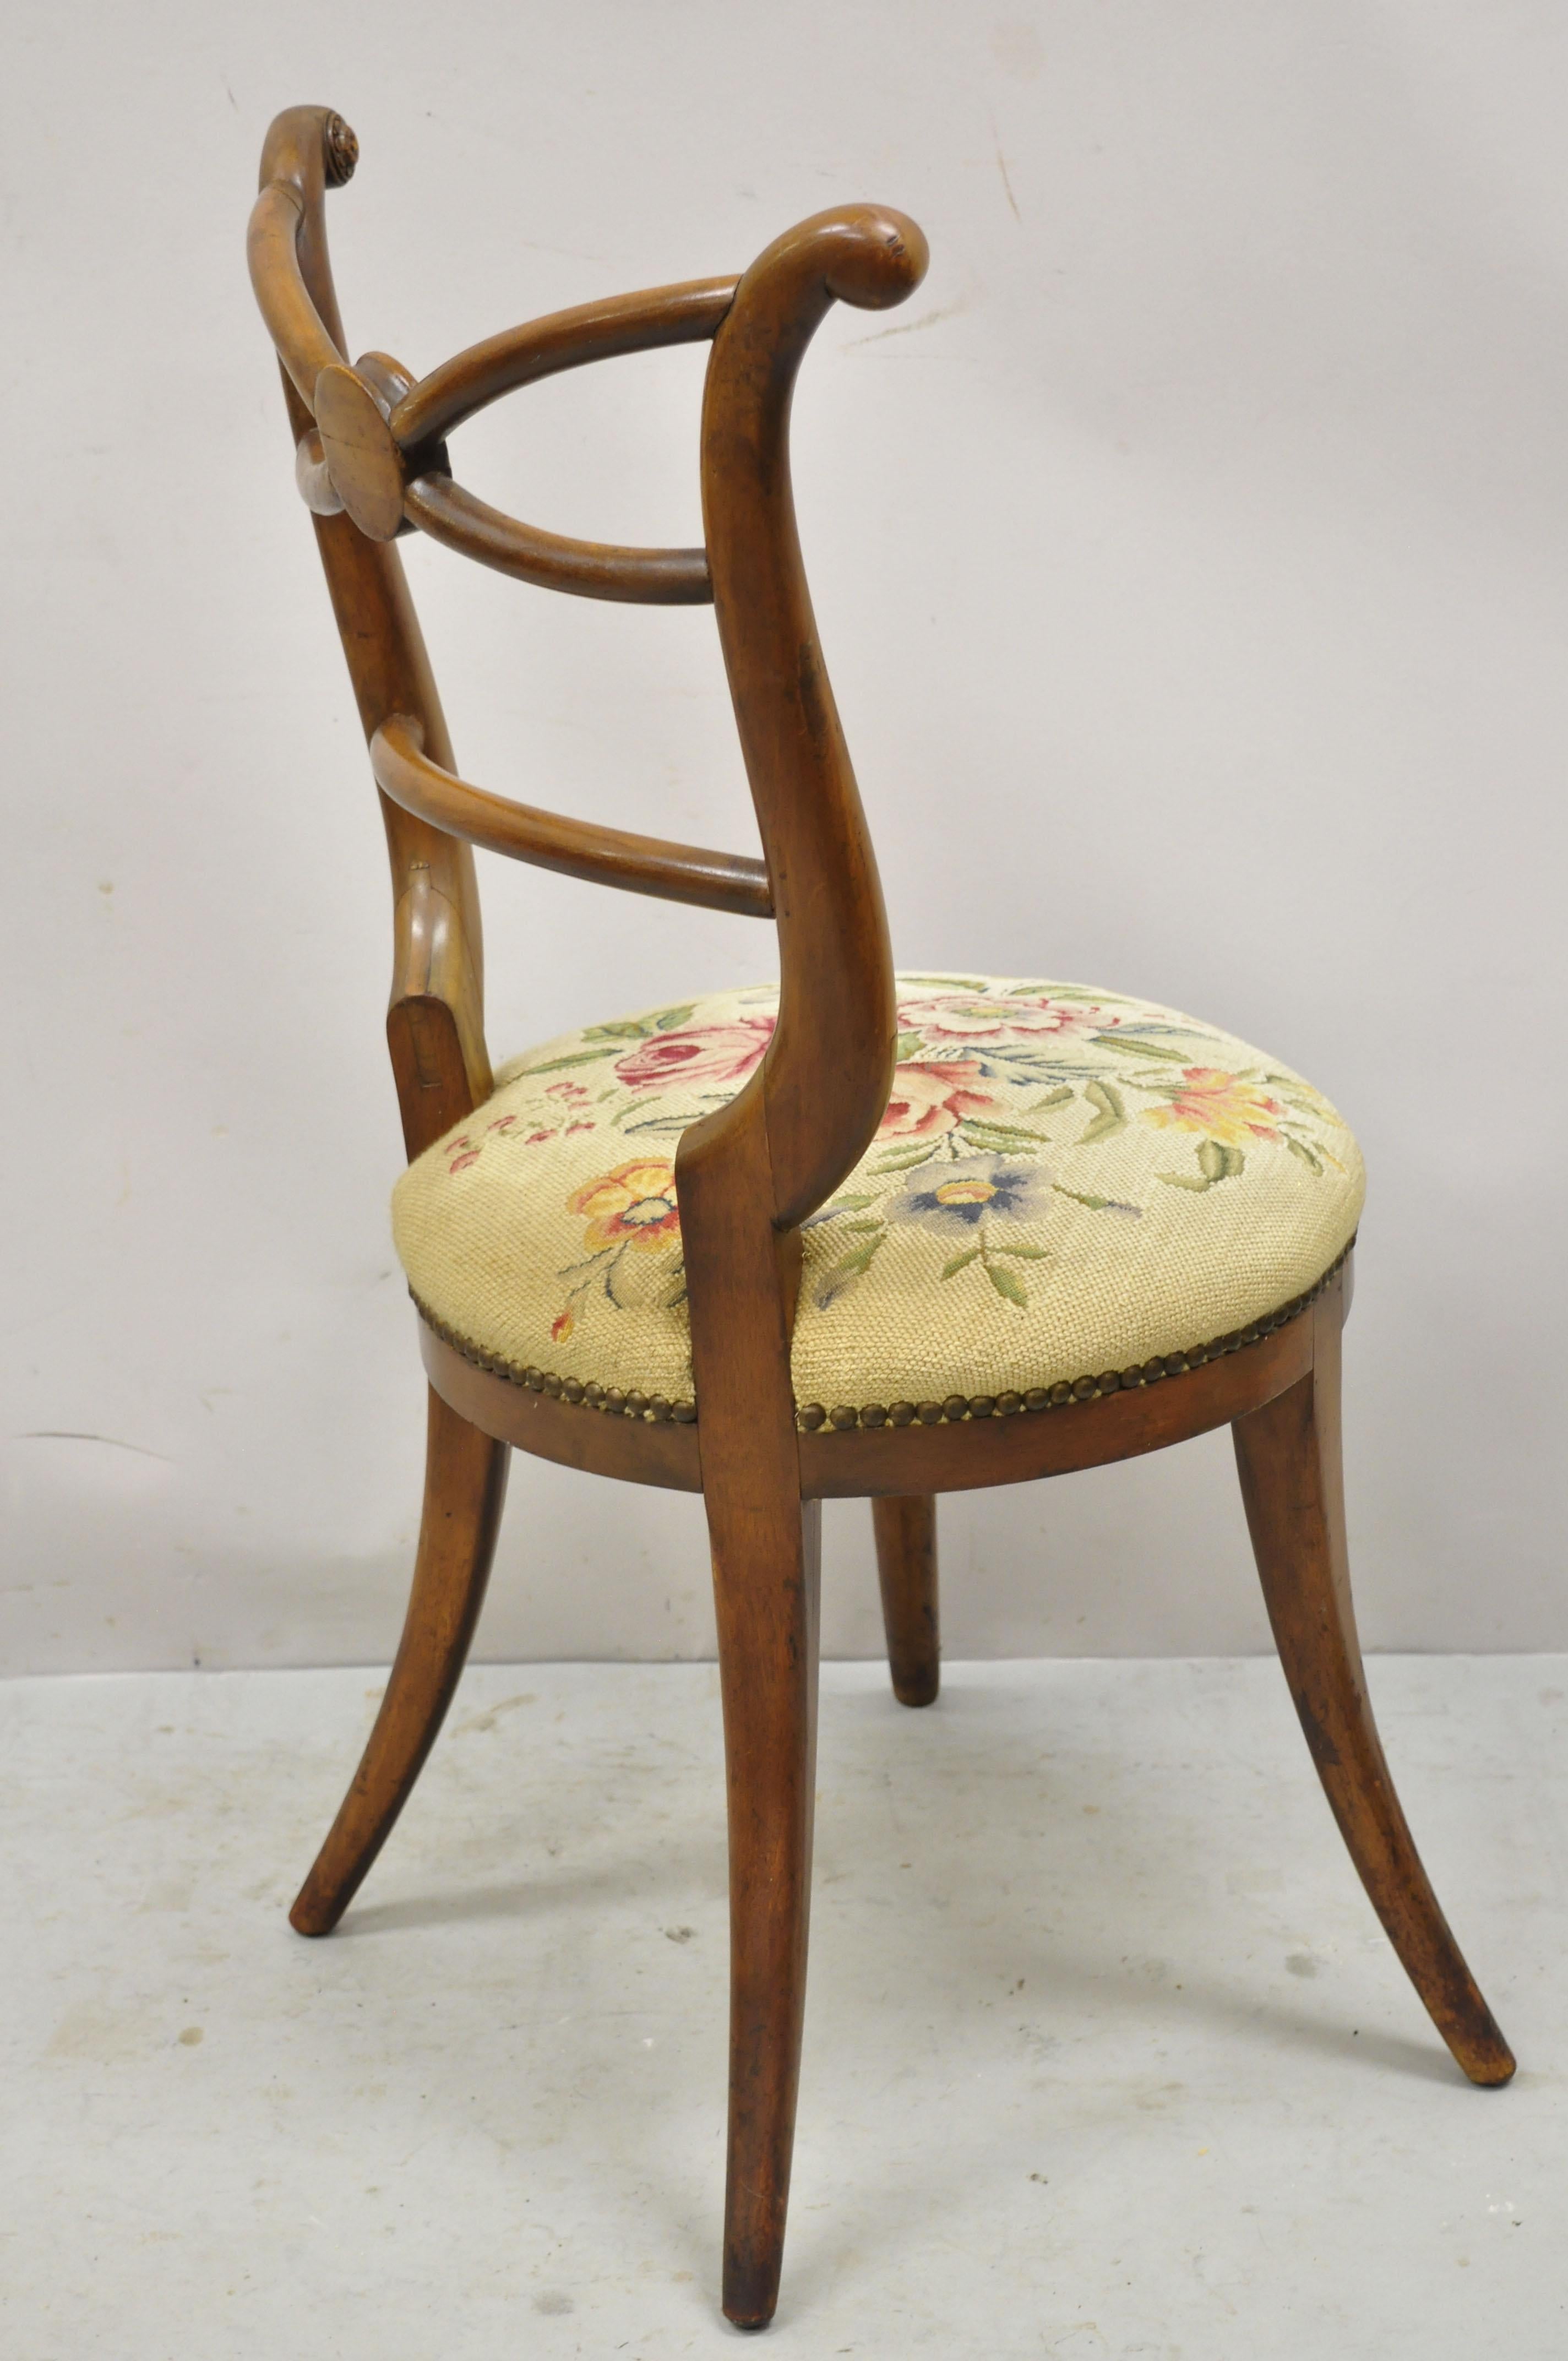 Vintage Italian Biedermeier Saber Leg Accent Side Chair with Needlepoint Seat For Sale 4